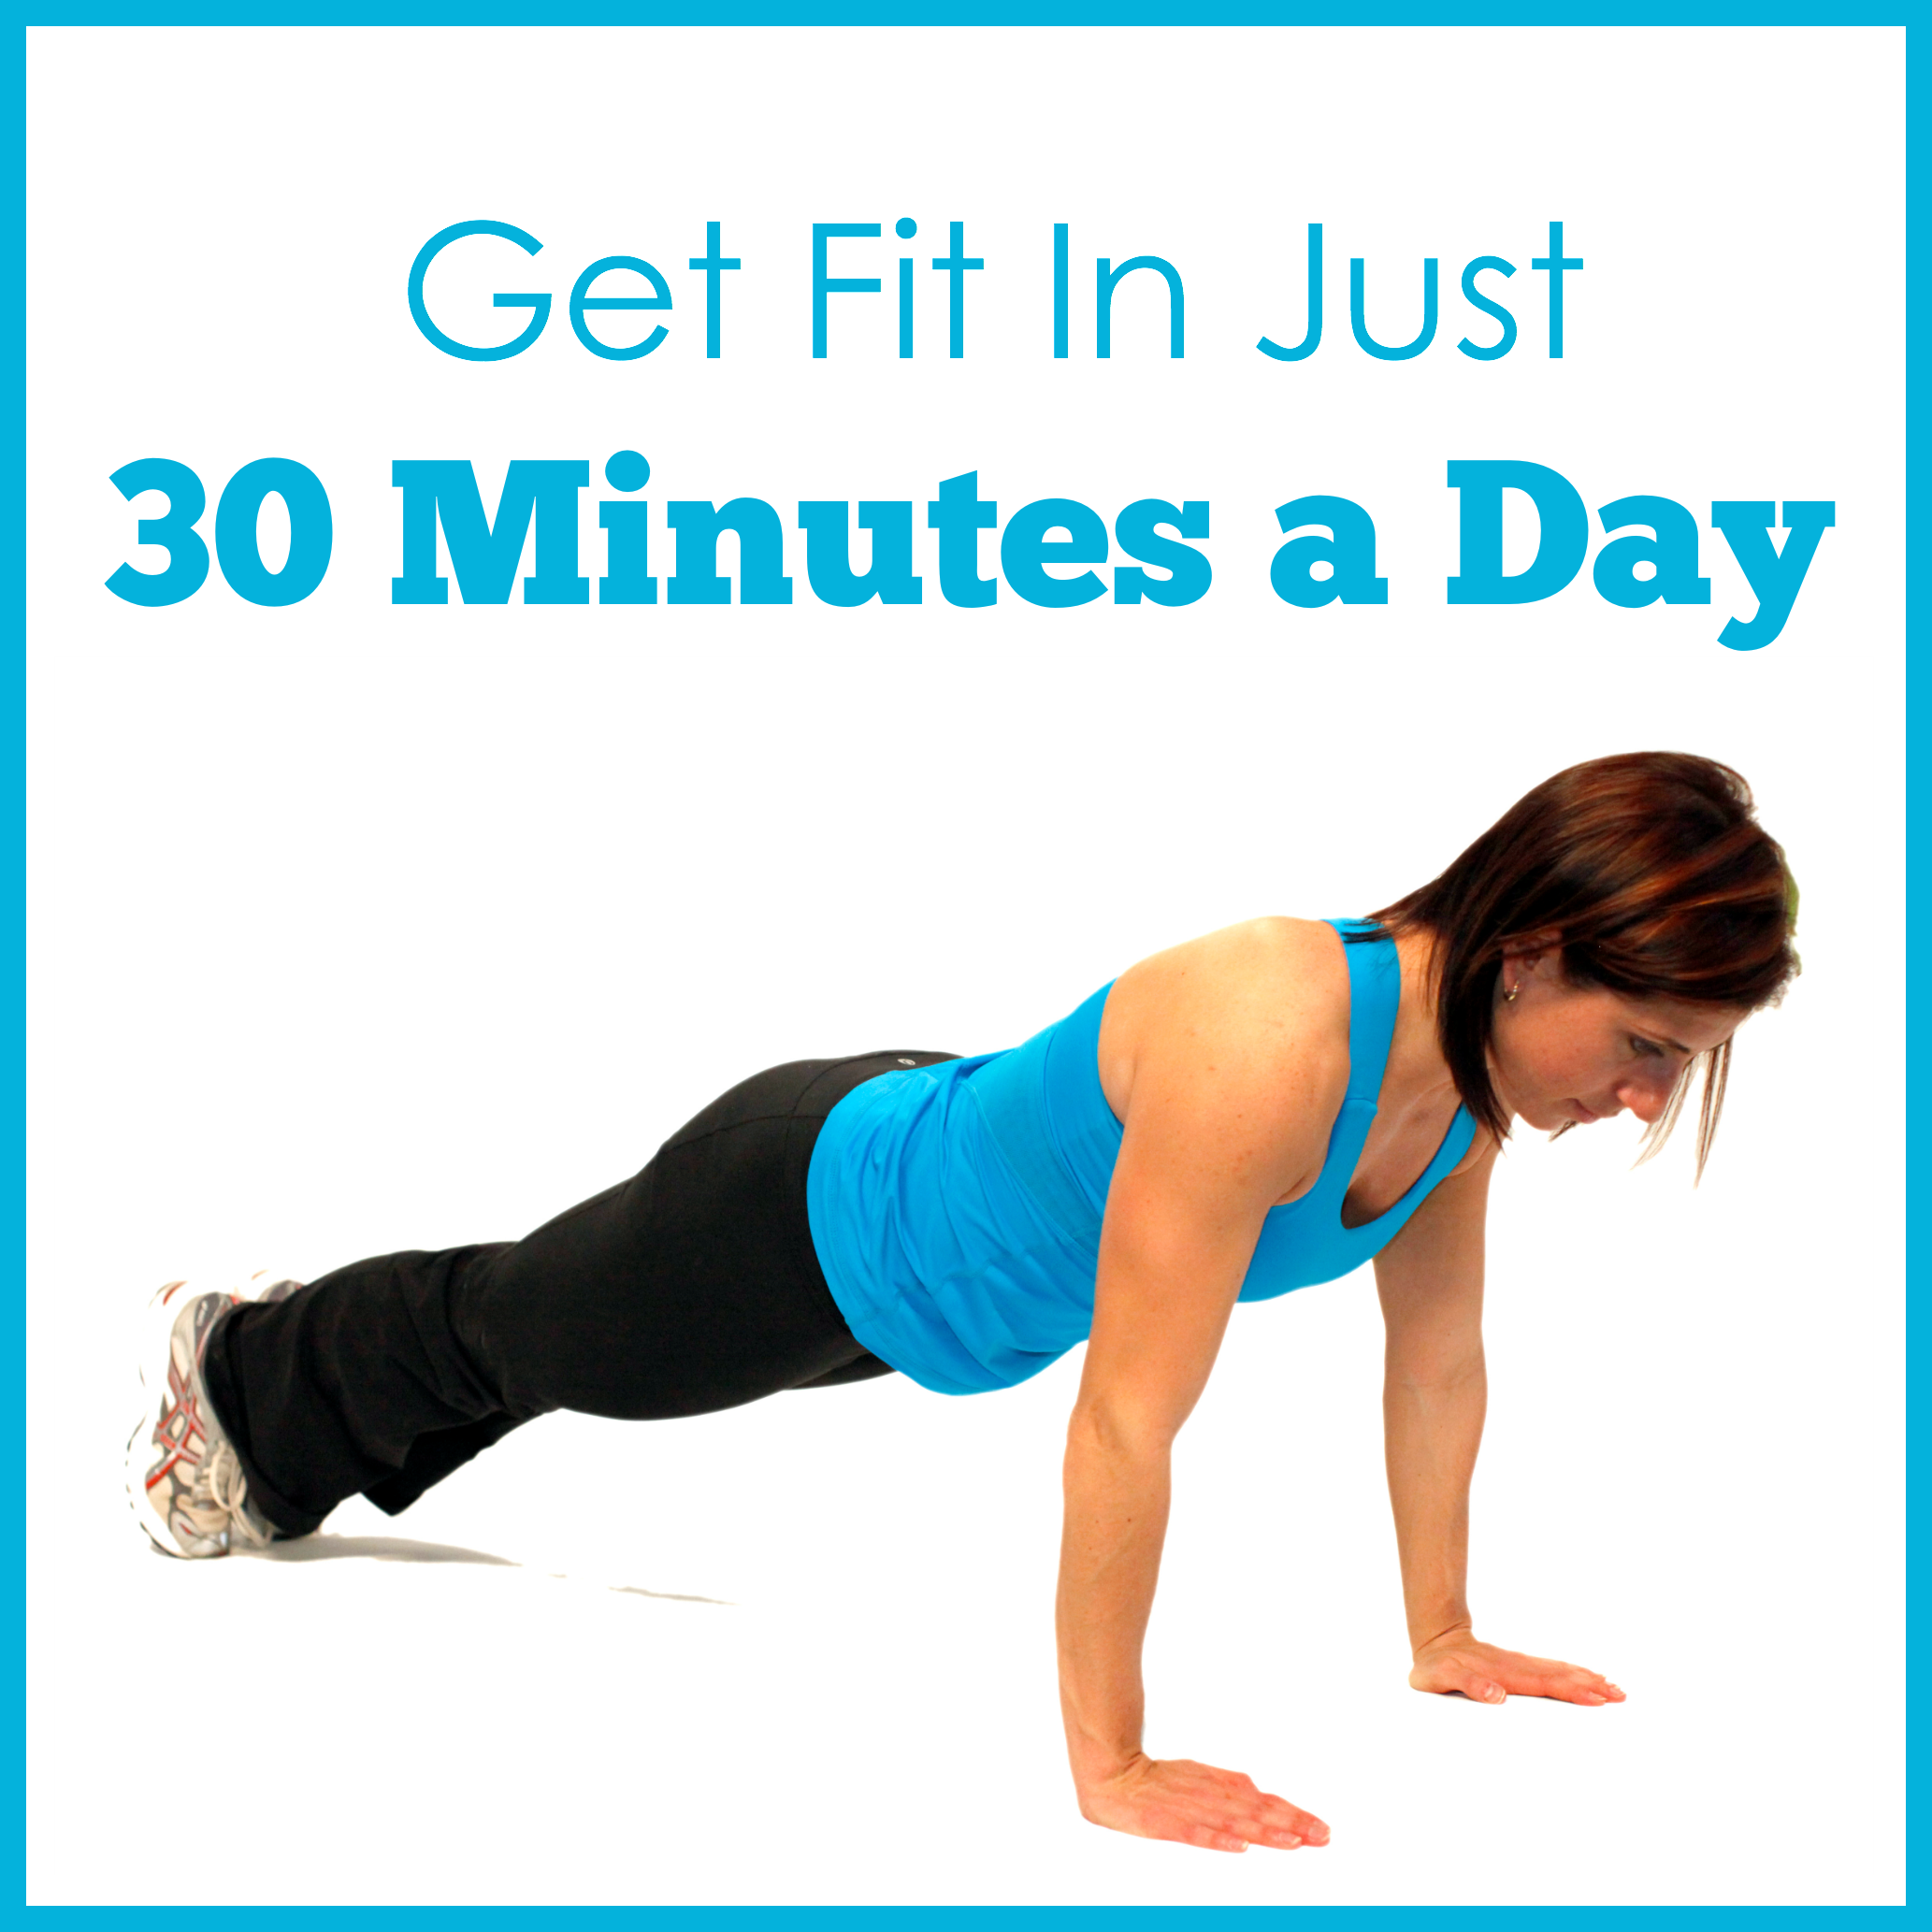 Crunched for time? You CAN get fit in just 30 minutes a day with these simple strategies!